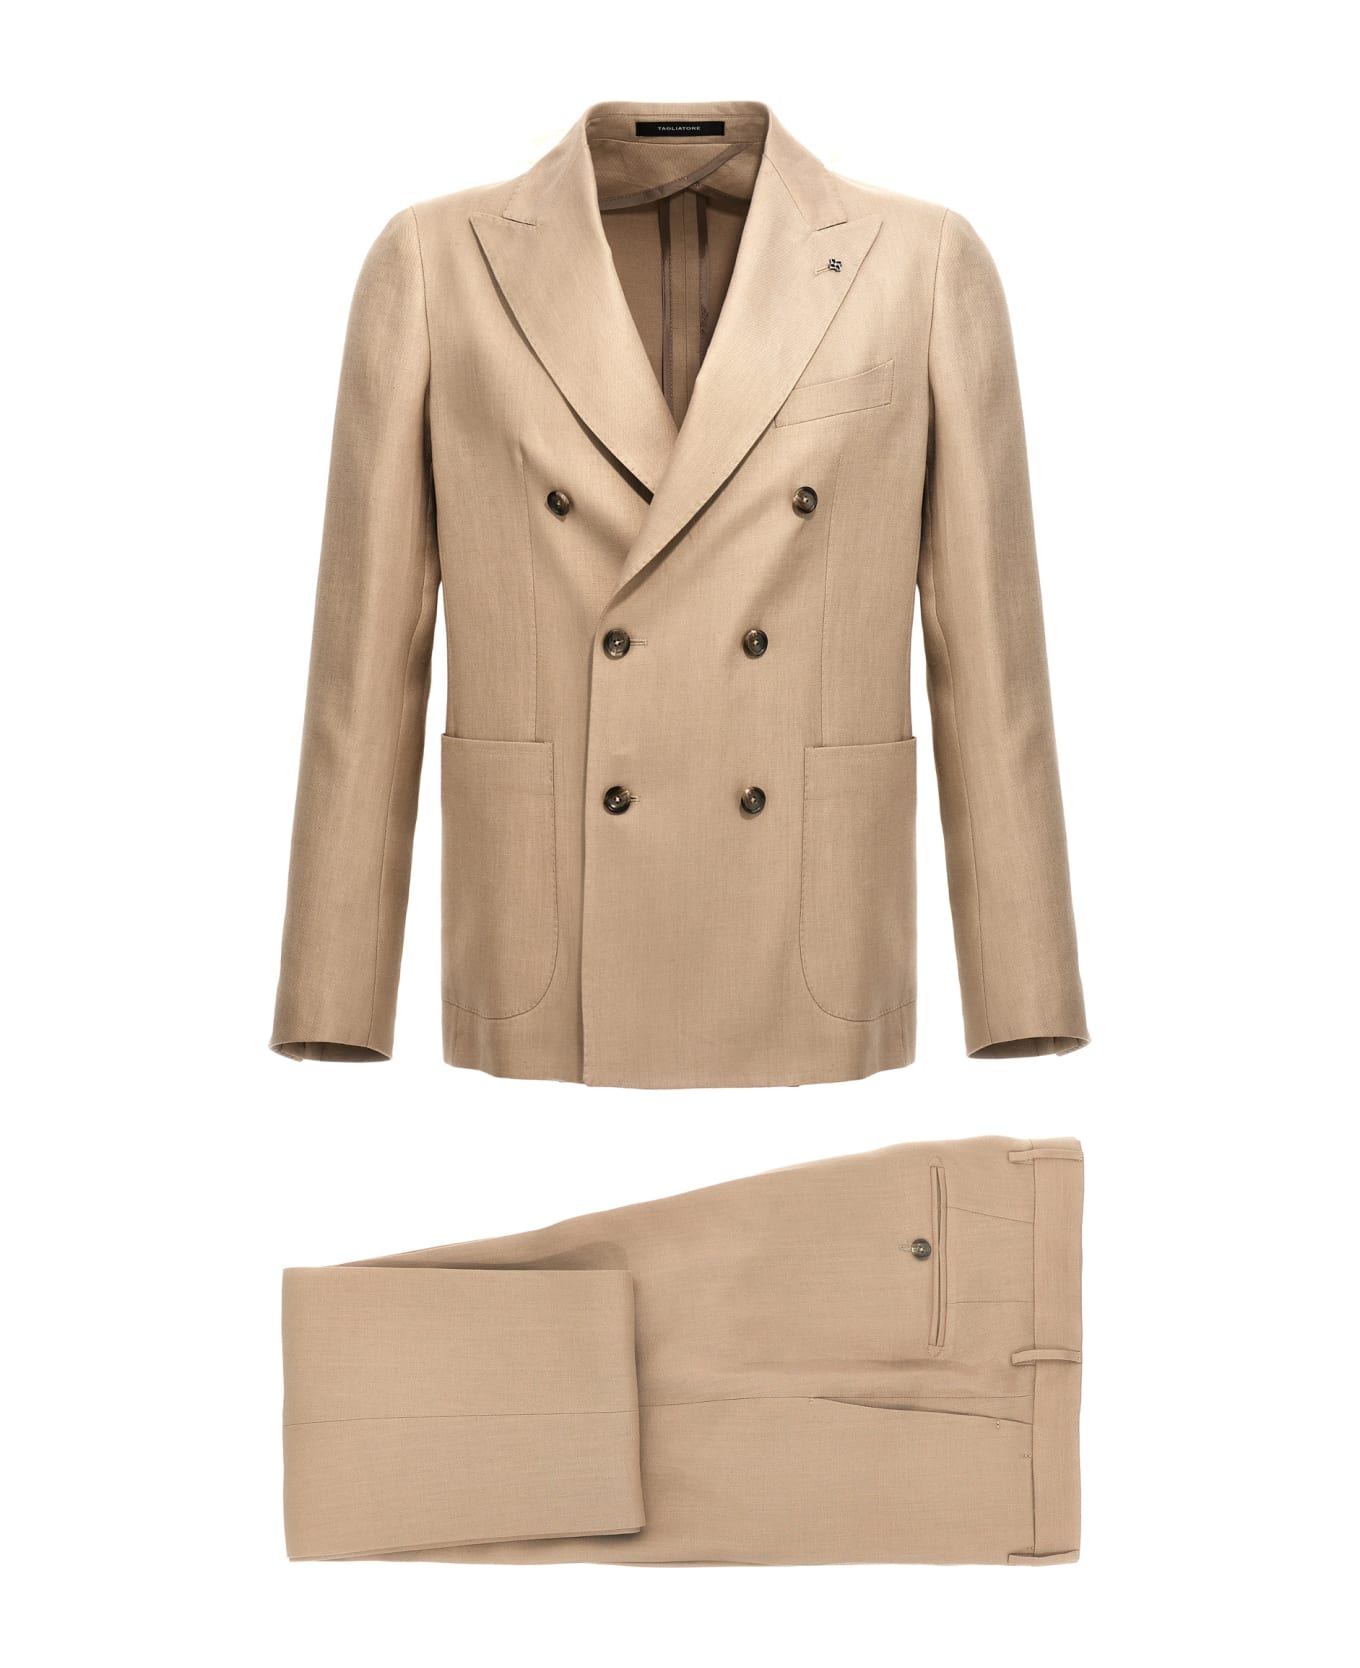 Tagliatore Double-breasted Linen Suit - Beige スーツ